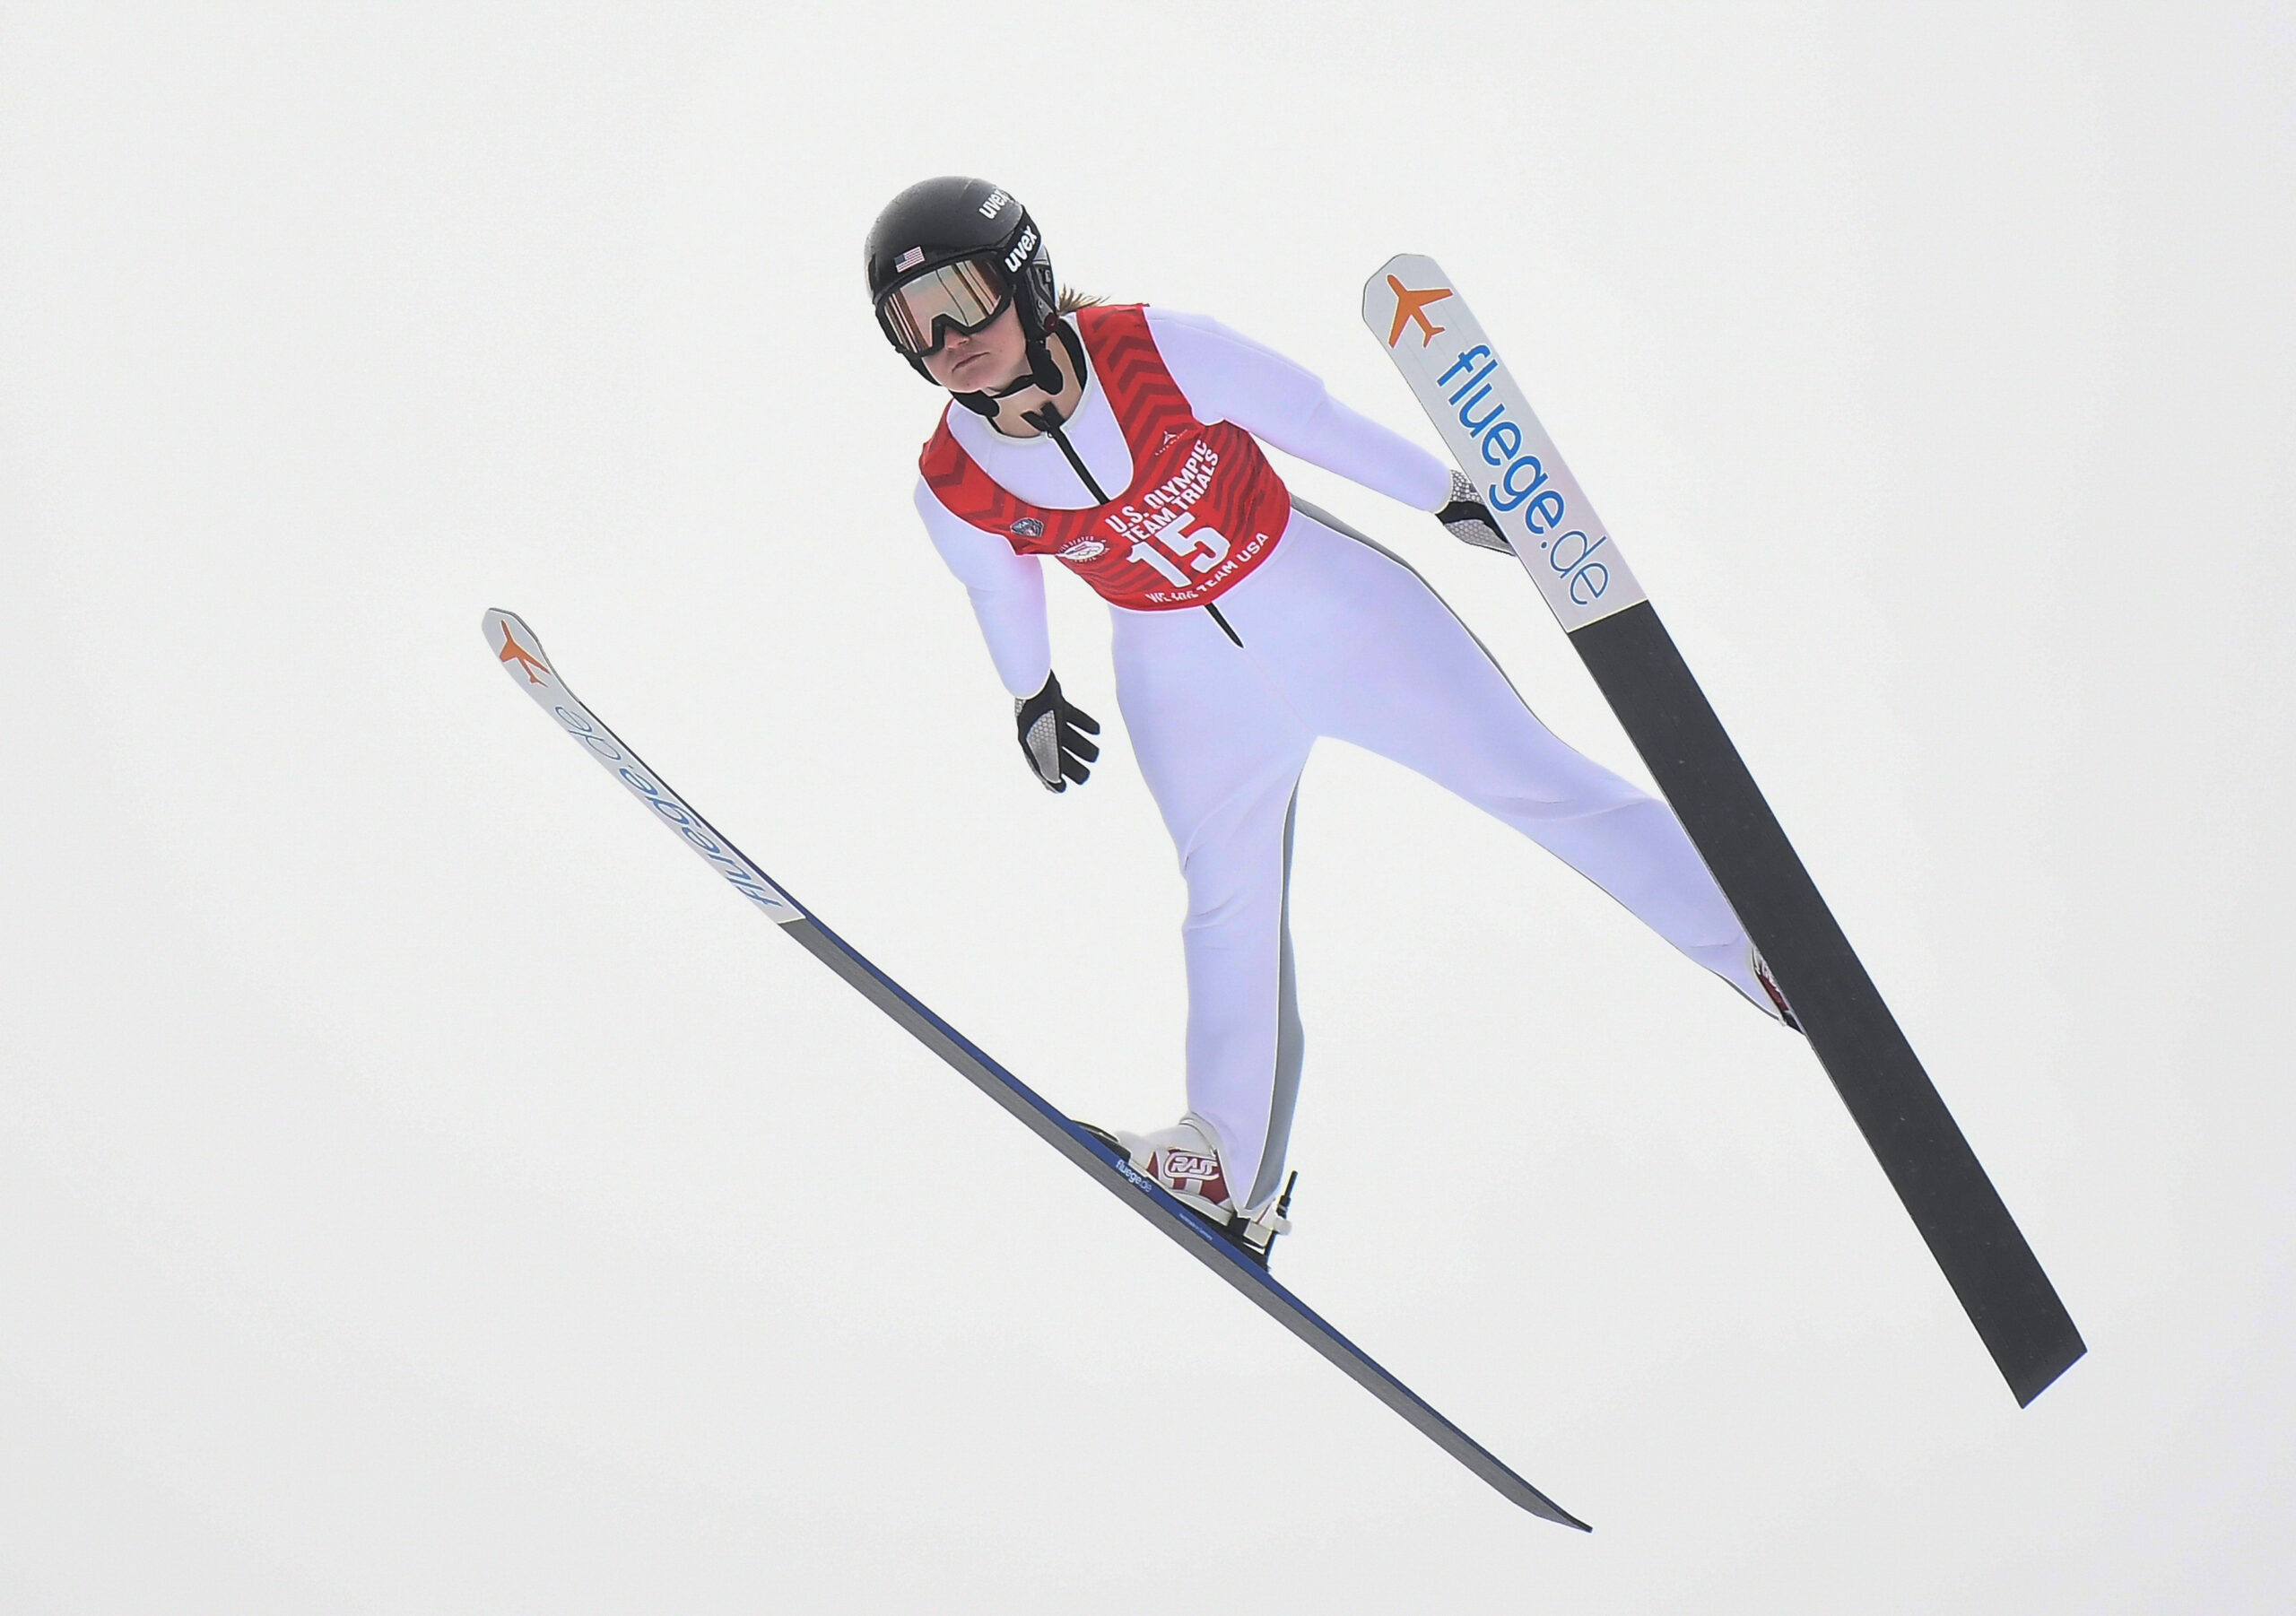 Anna Hoffman soars through the air during the women's ski jumping competition